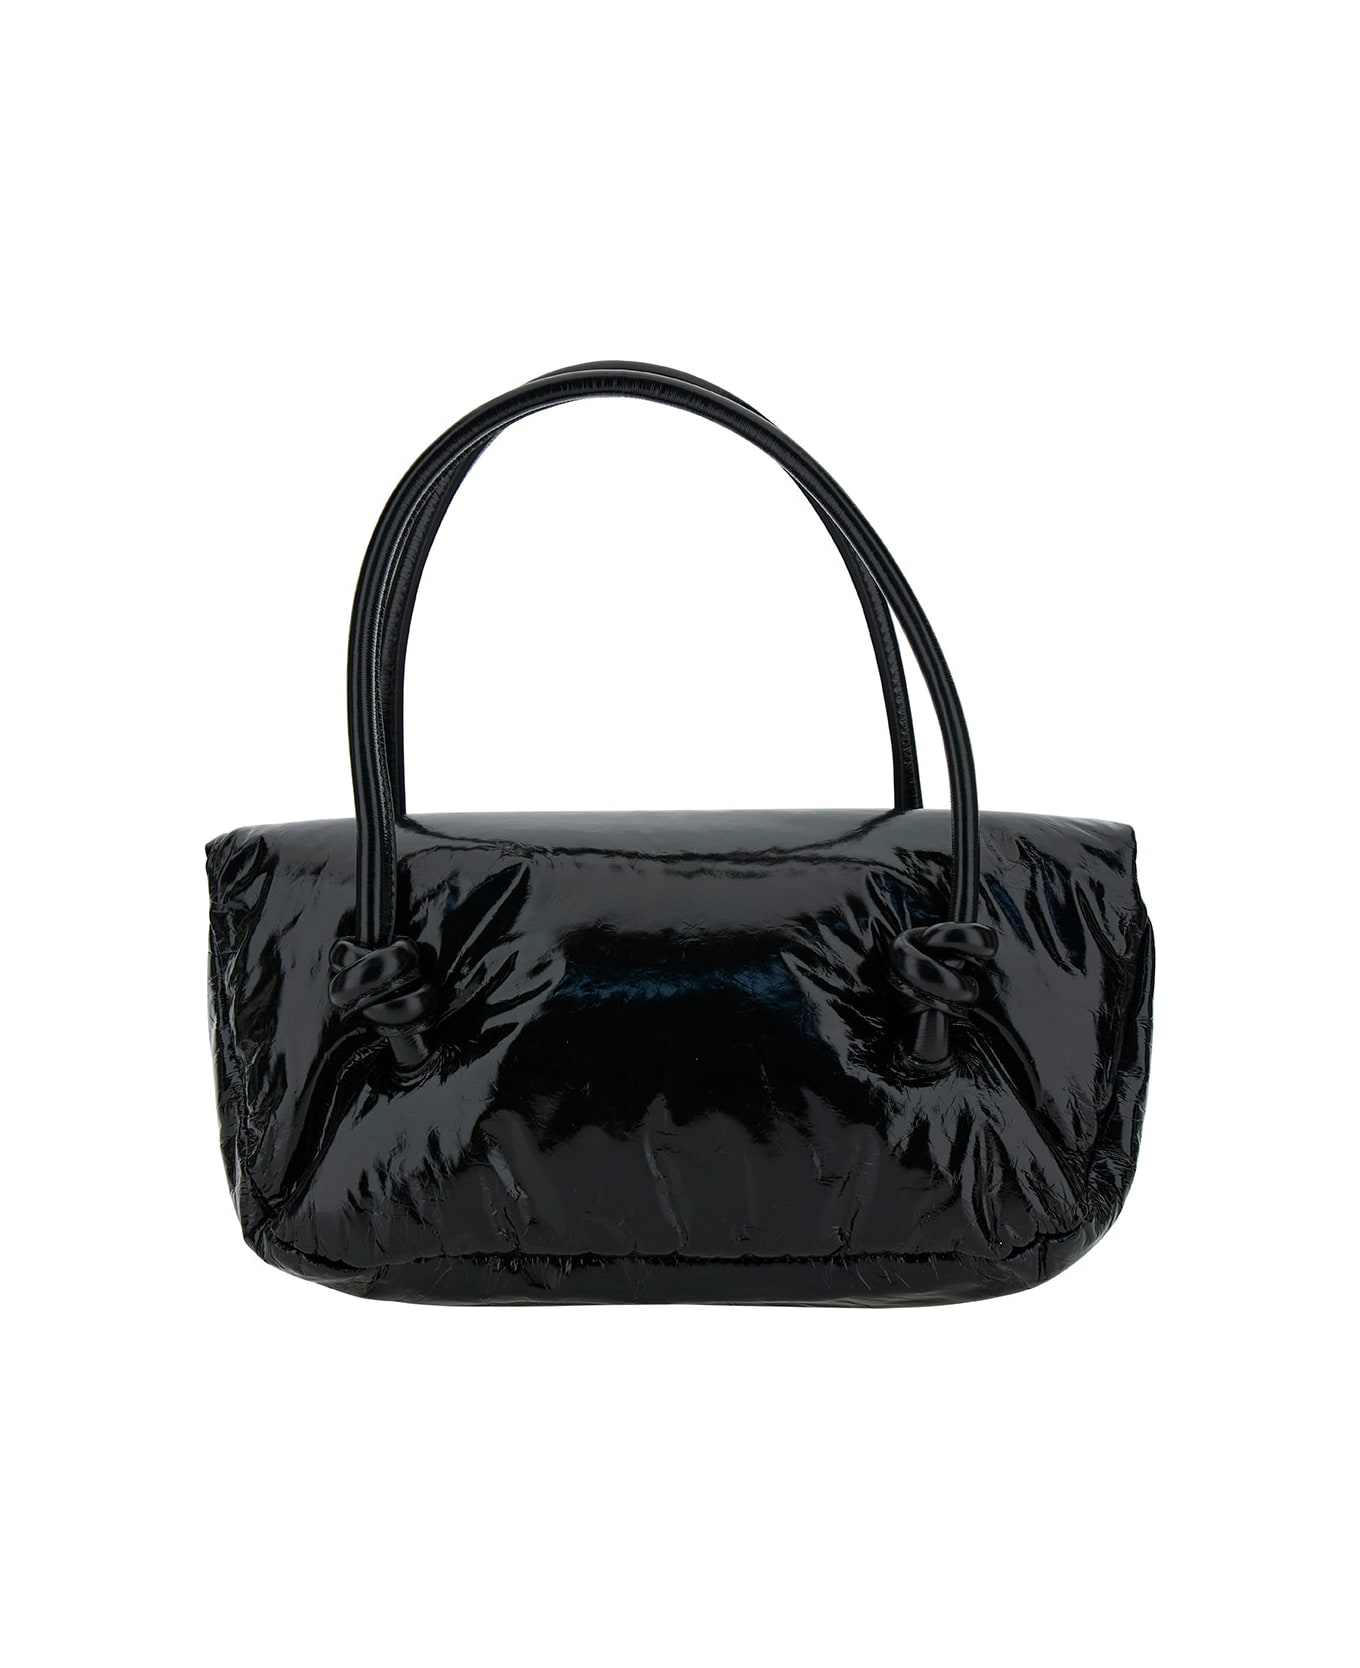 Jil Sander 'knot Small' Black Shoulder Bag With Laminated Logo In Patent Leather Woman - Black トートバッグ